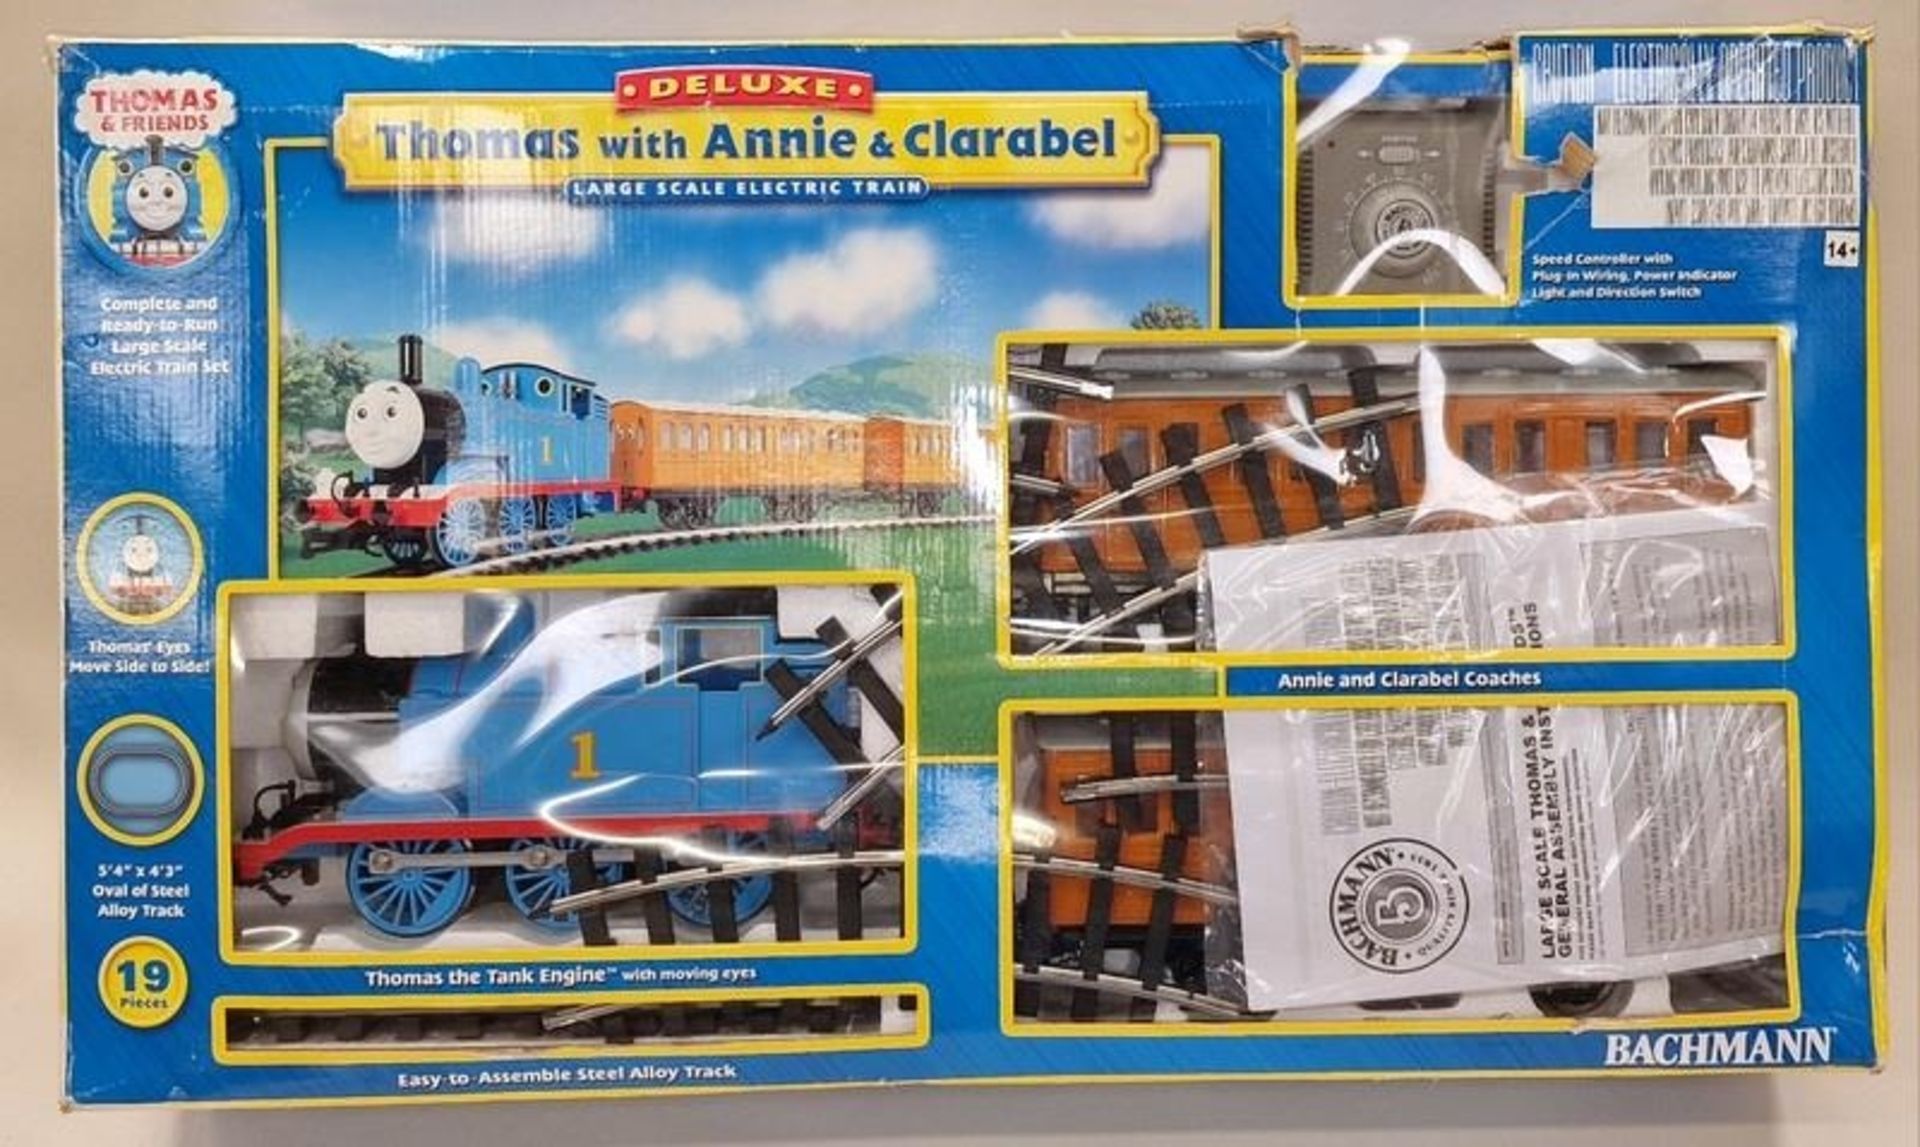 Bachmann Thomas & Friends Deluxe Thomas with Anne & Clarabel boxed 19 piece train set. Not checked